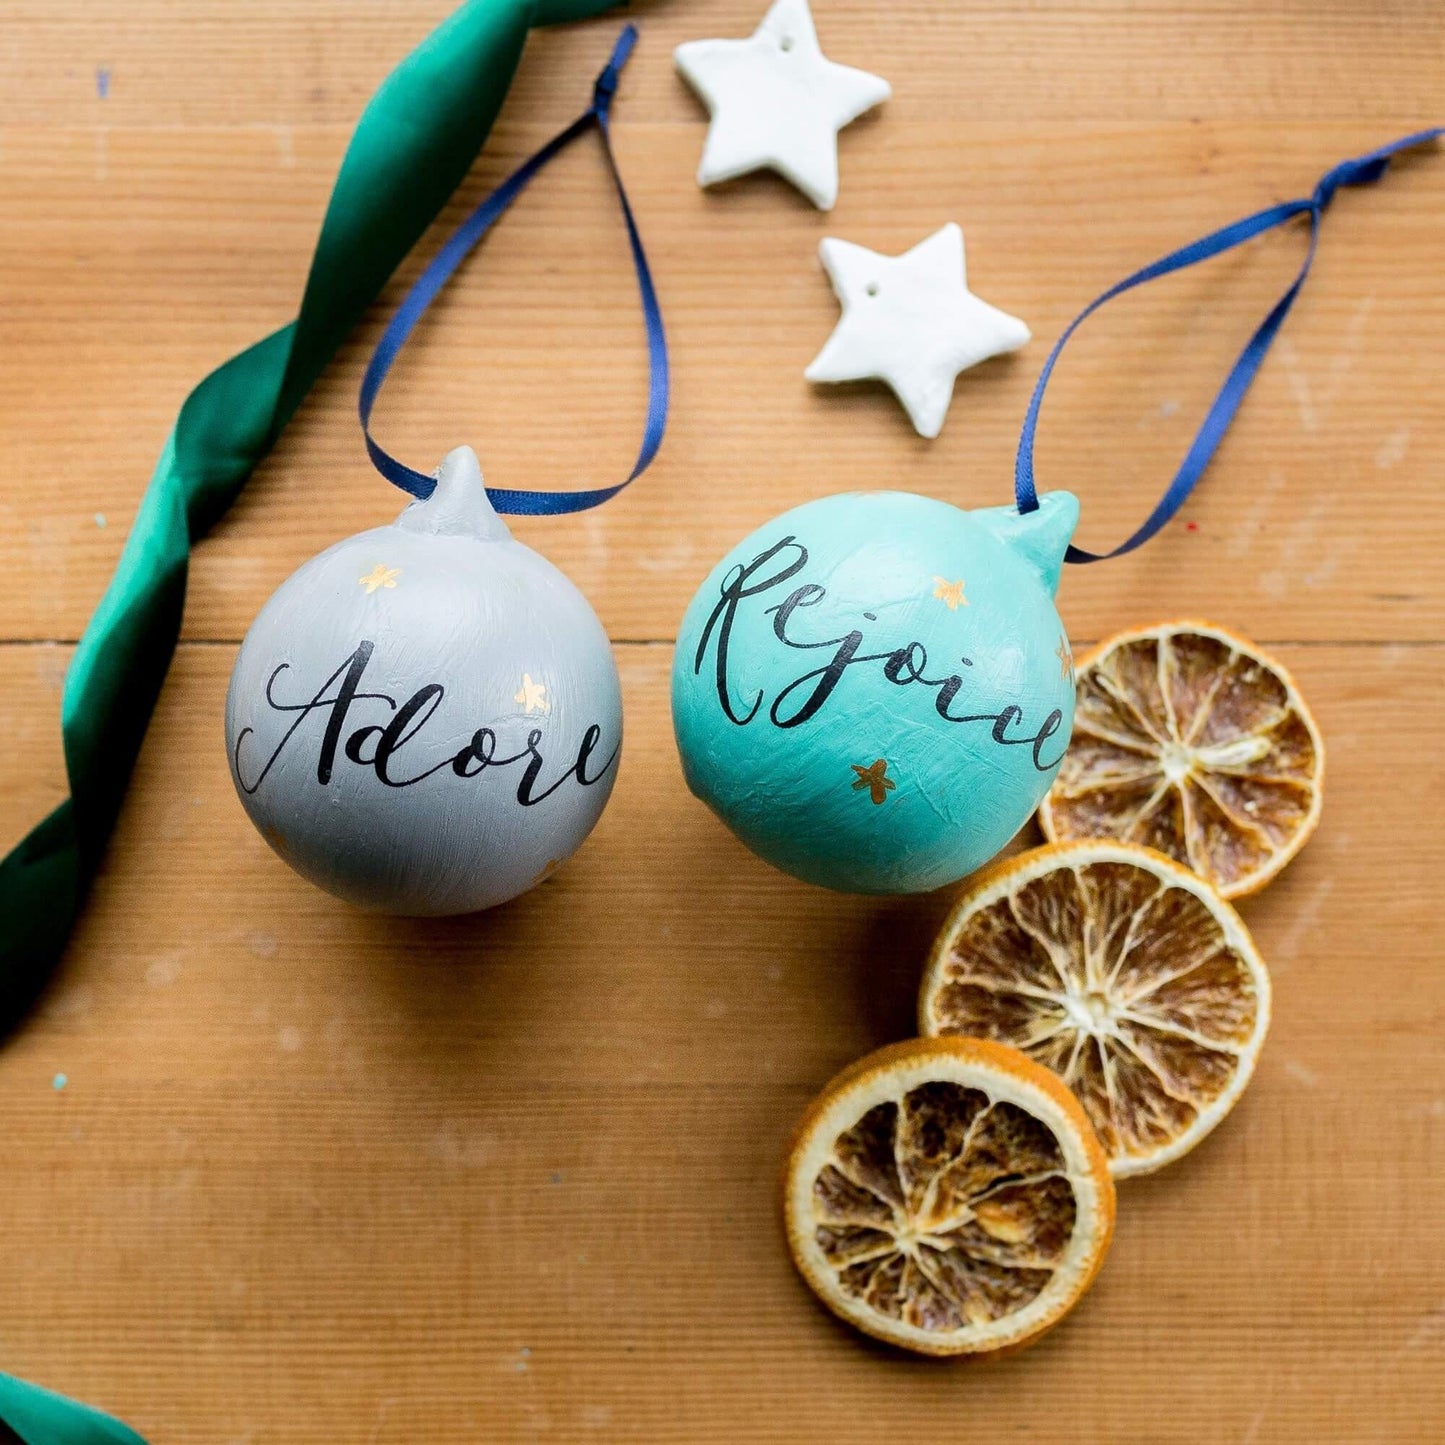 Christian Christmas decor - rejoice and adore hand lettered baubles